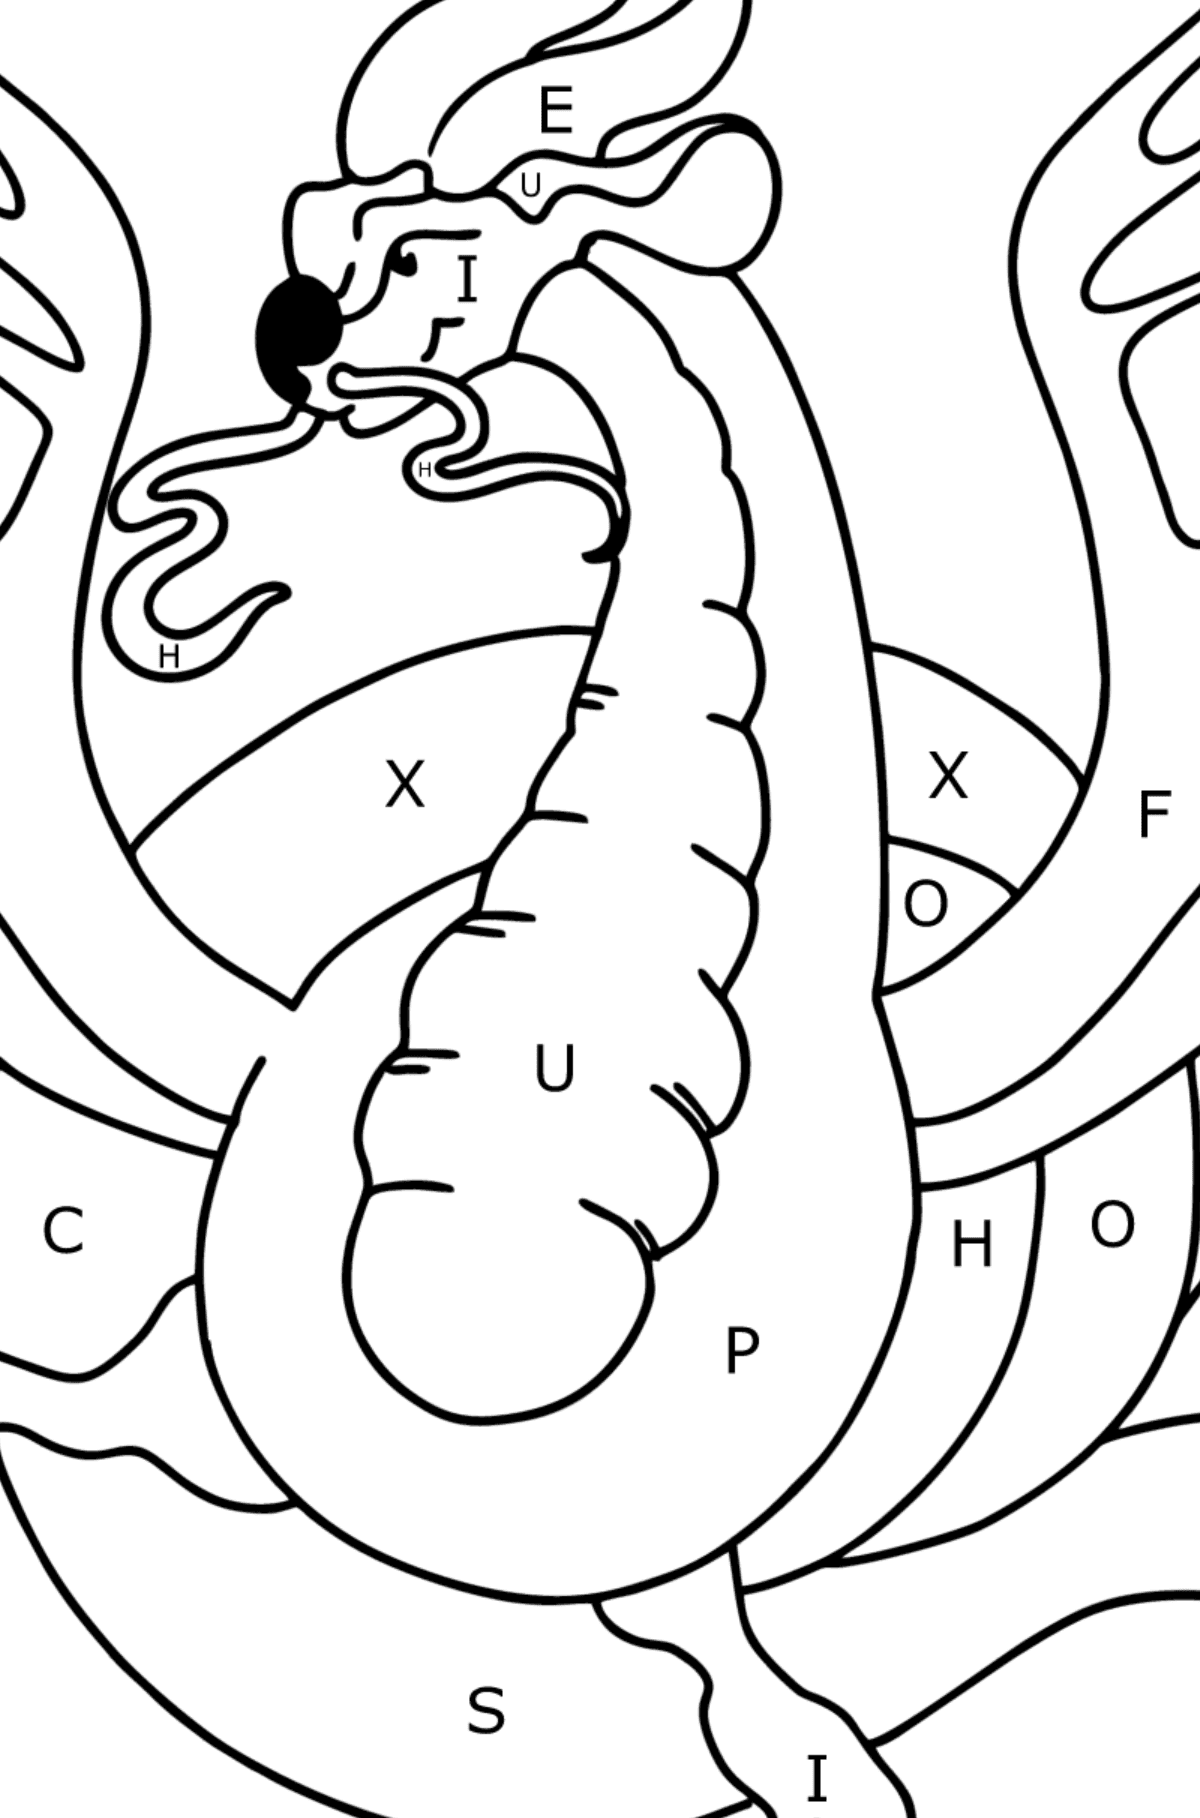 Dangerous Dragon coloring page - Coloring by Letters for Kids